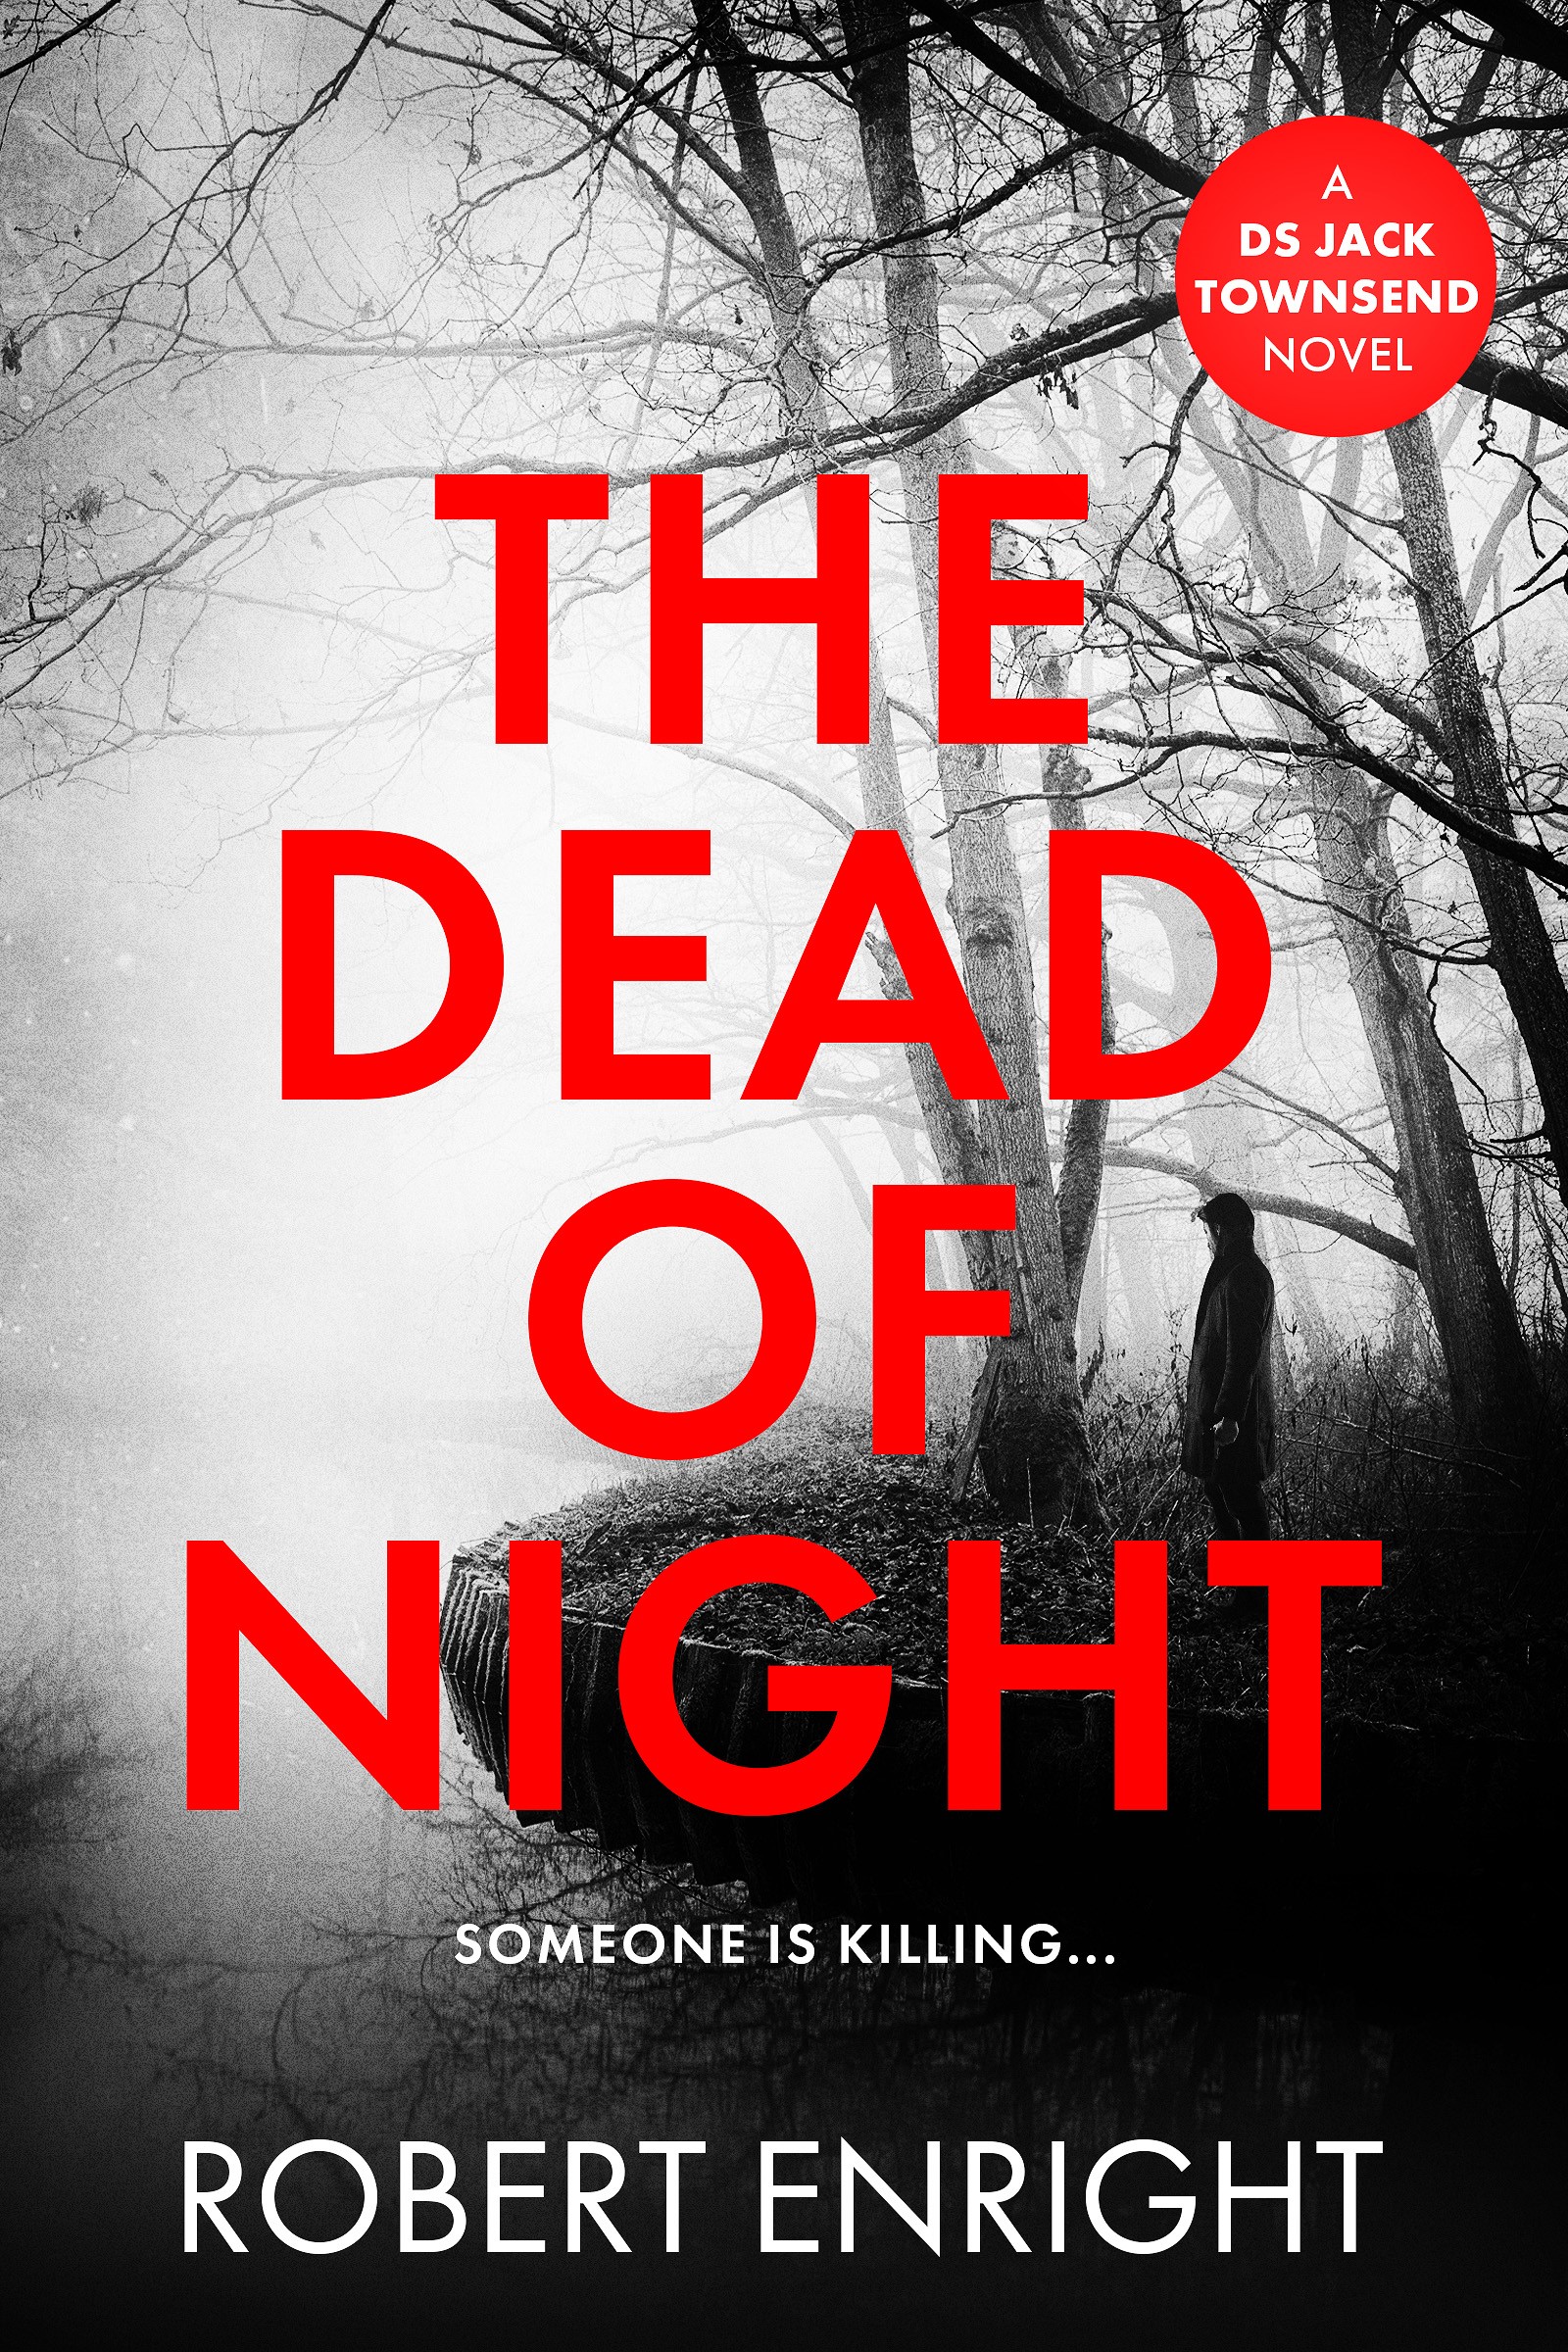 dead of night book review